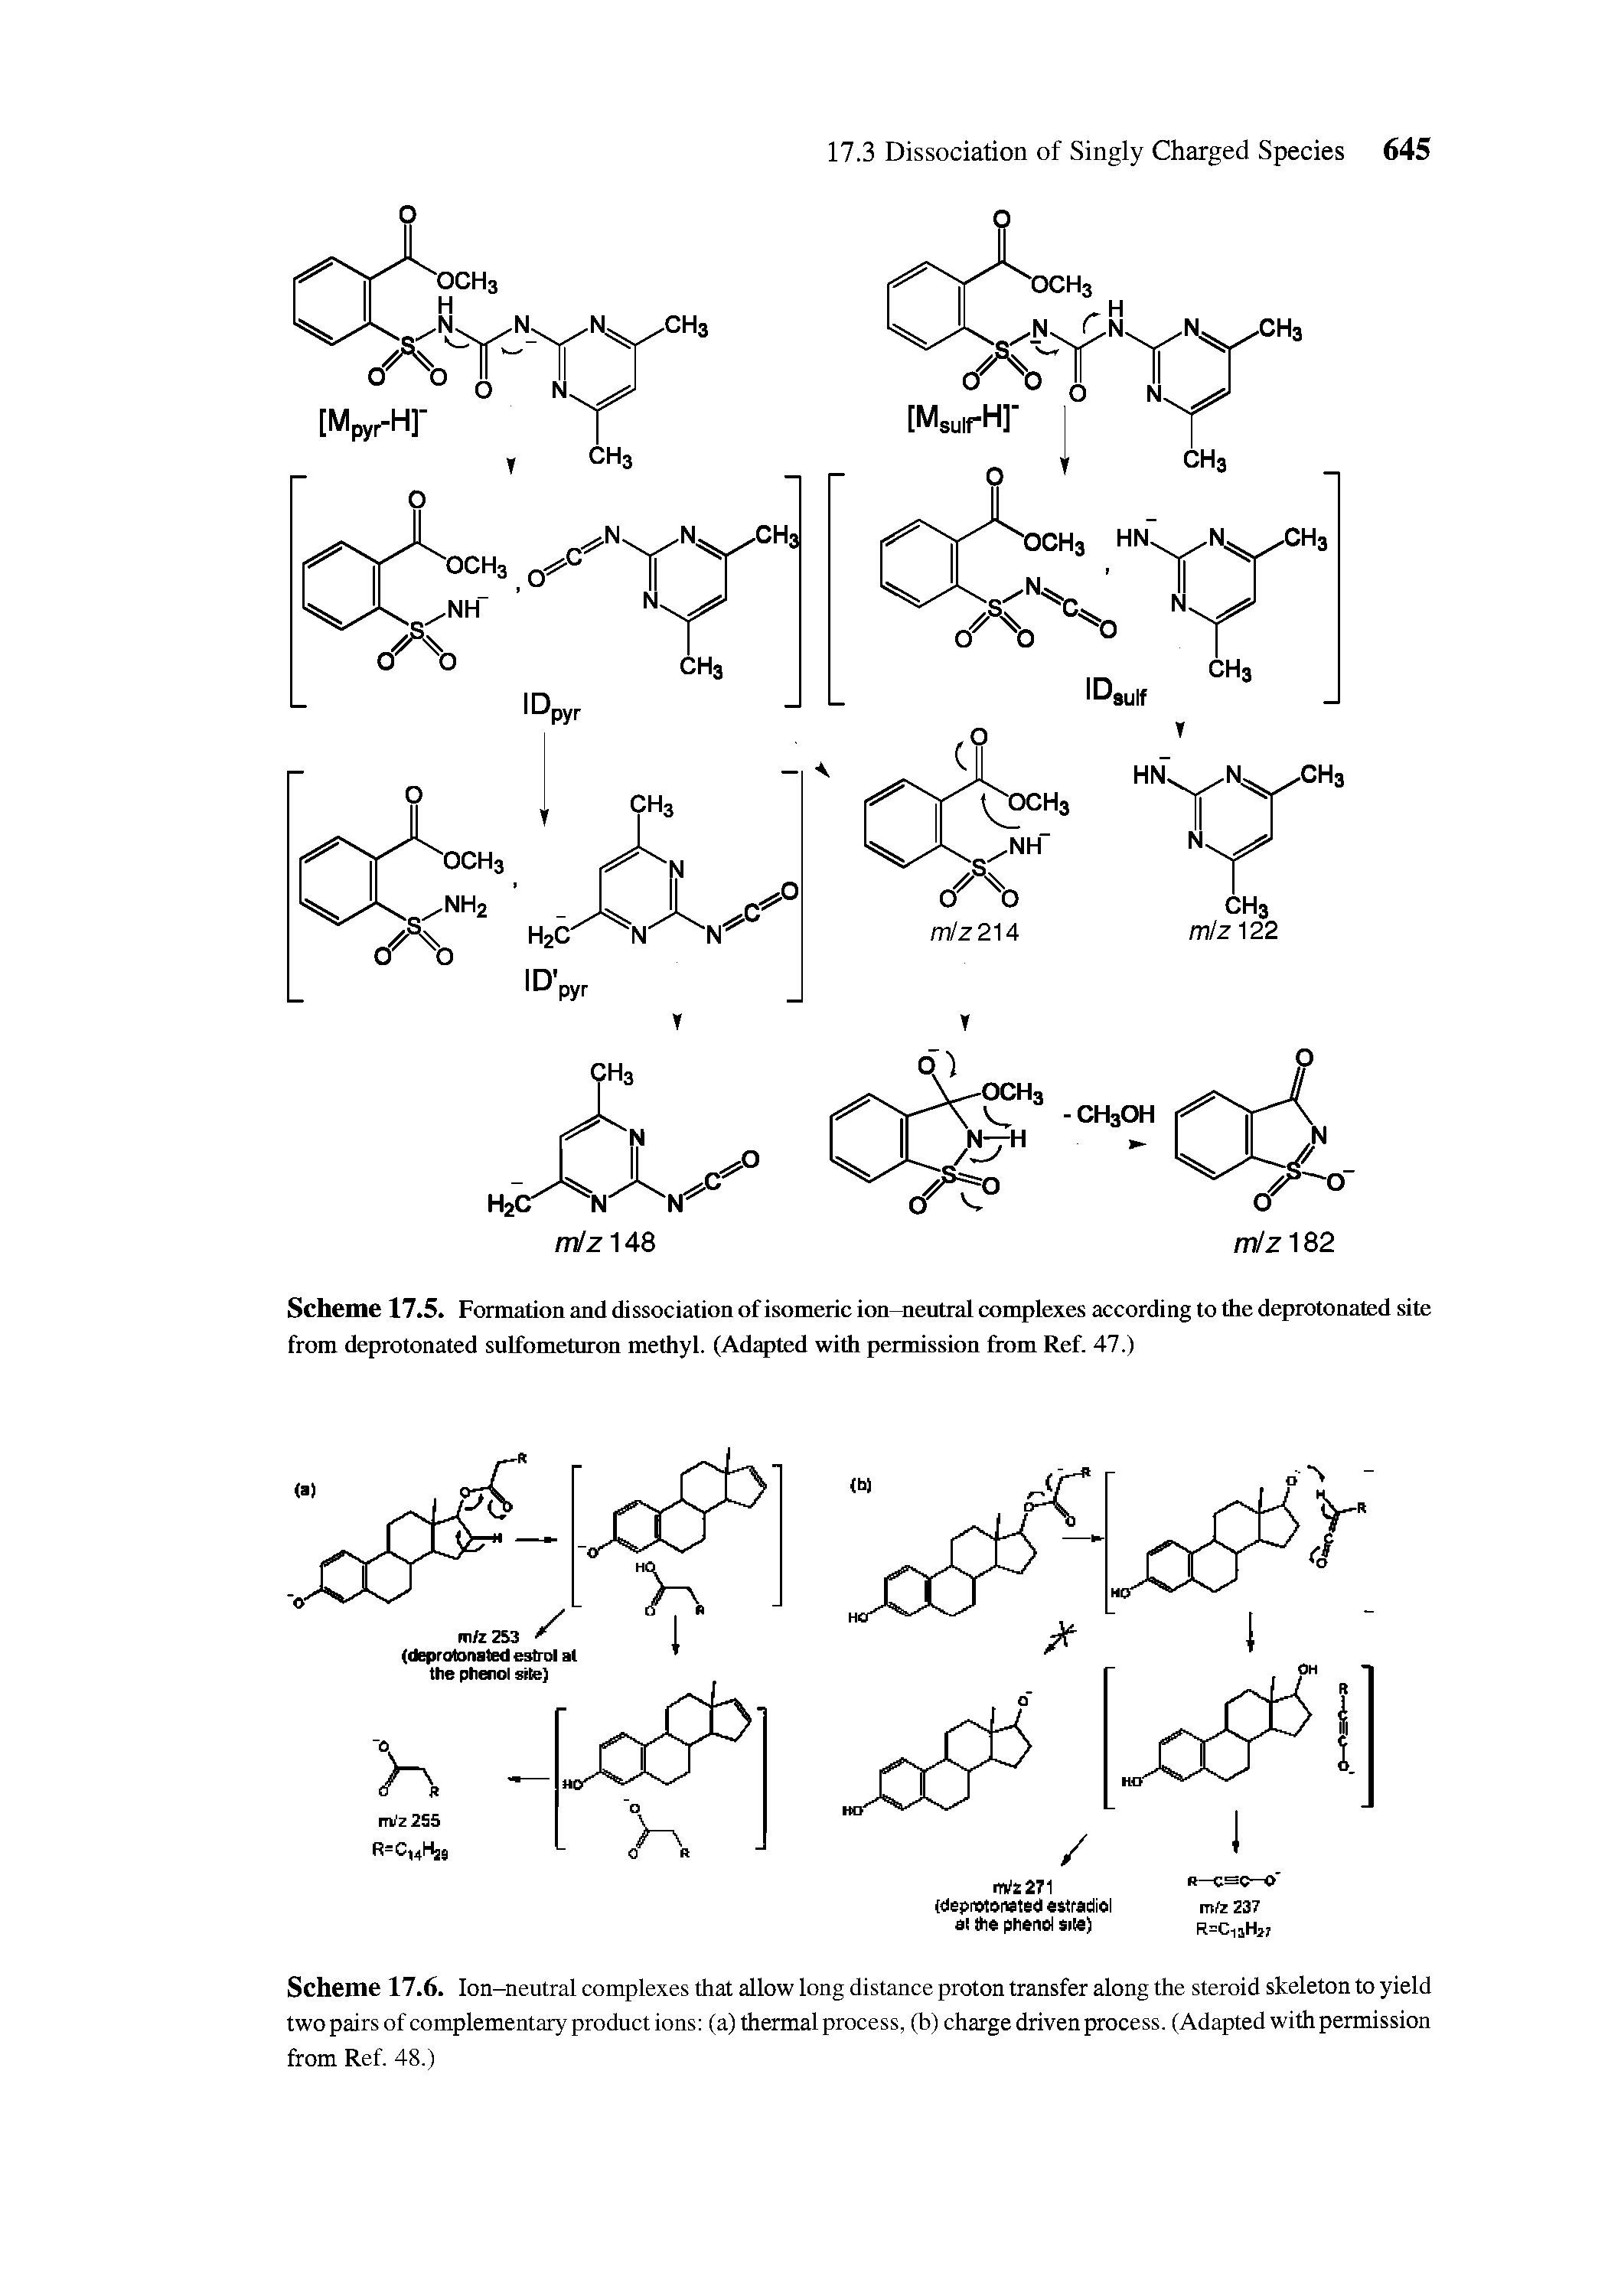 Scheme 17.6. Ion-neutral complexes that allow long distance proton transfer along the steroid skeleton to yield two pairs of complementary product ions (a) thermal process, (b) charge driven process. (Adapted with permission from Ref. 48.)...